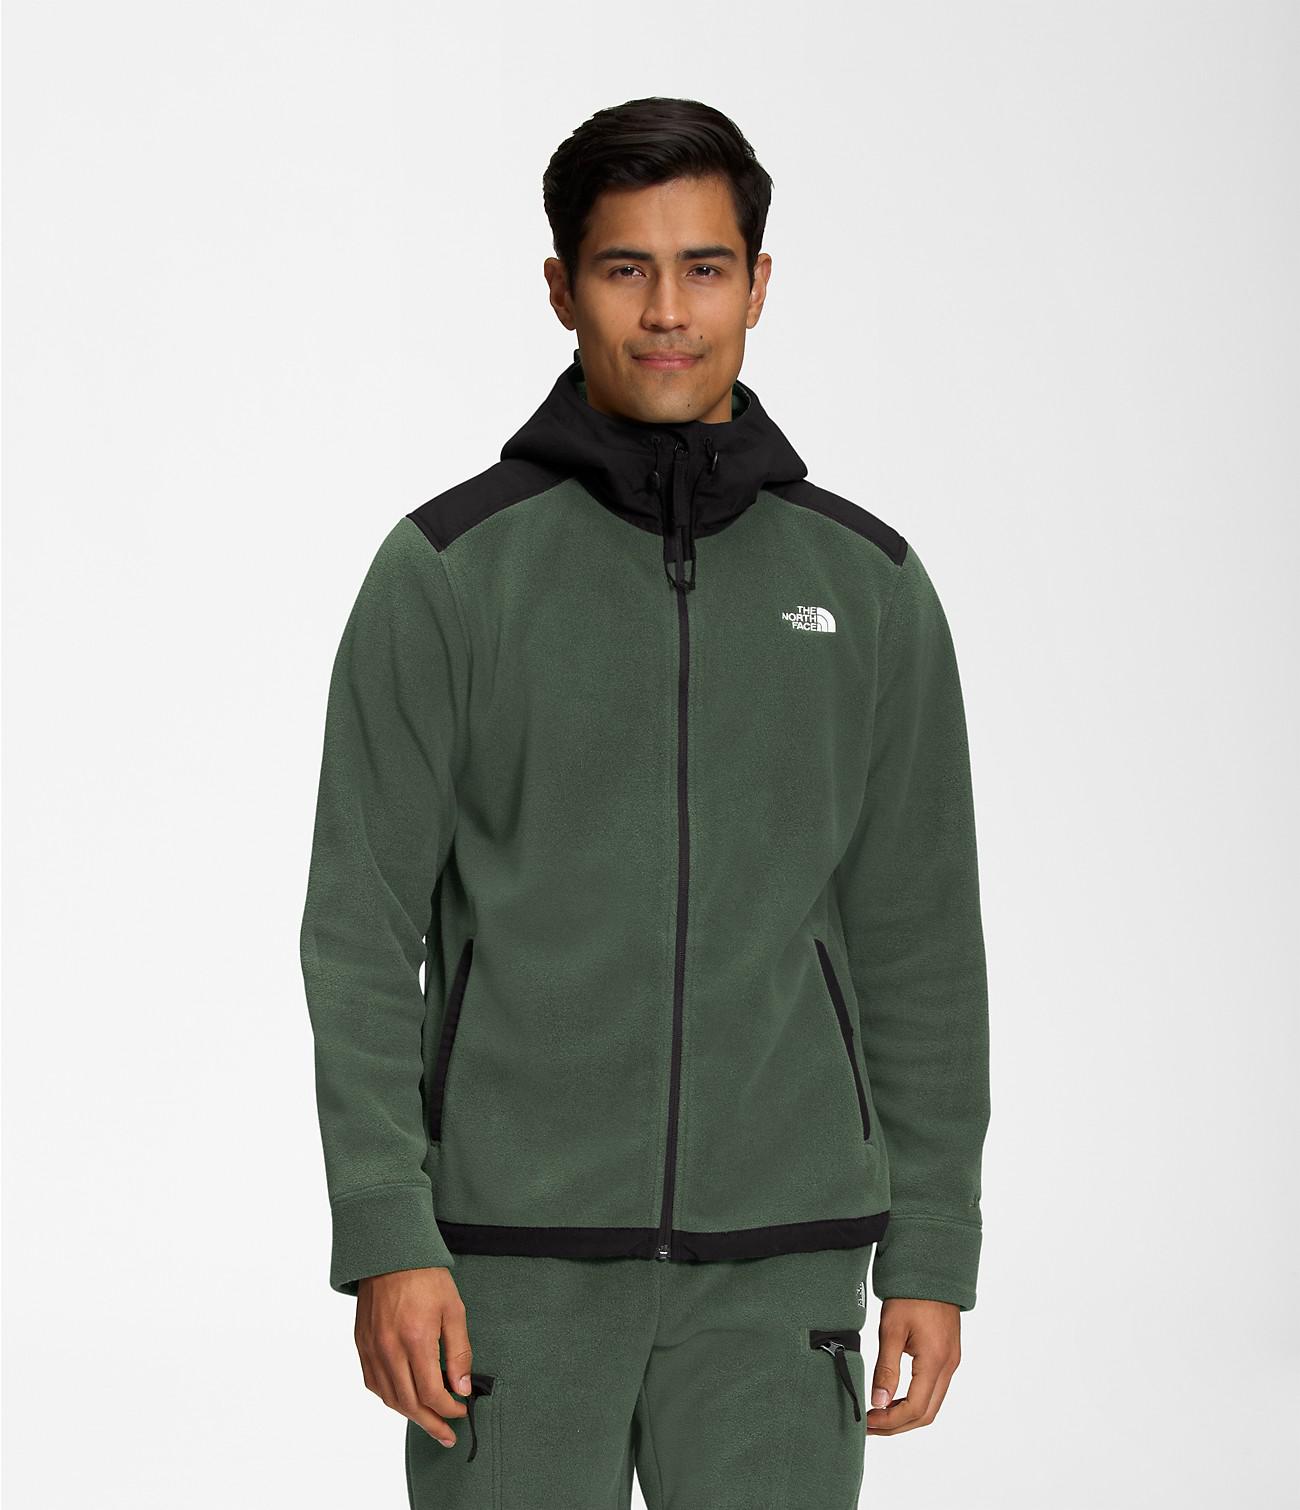 Men’s Alpine Polartec® 200 Full-Zip Hooded Jacket by THE NORTH FACE